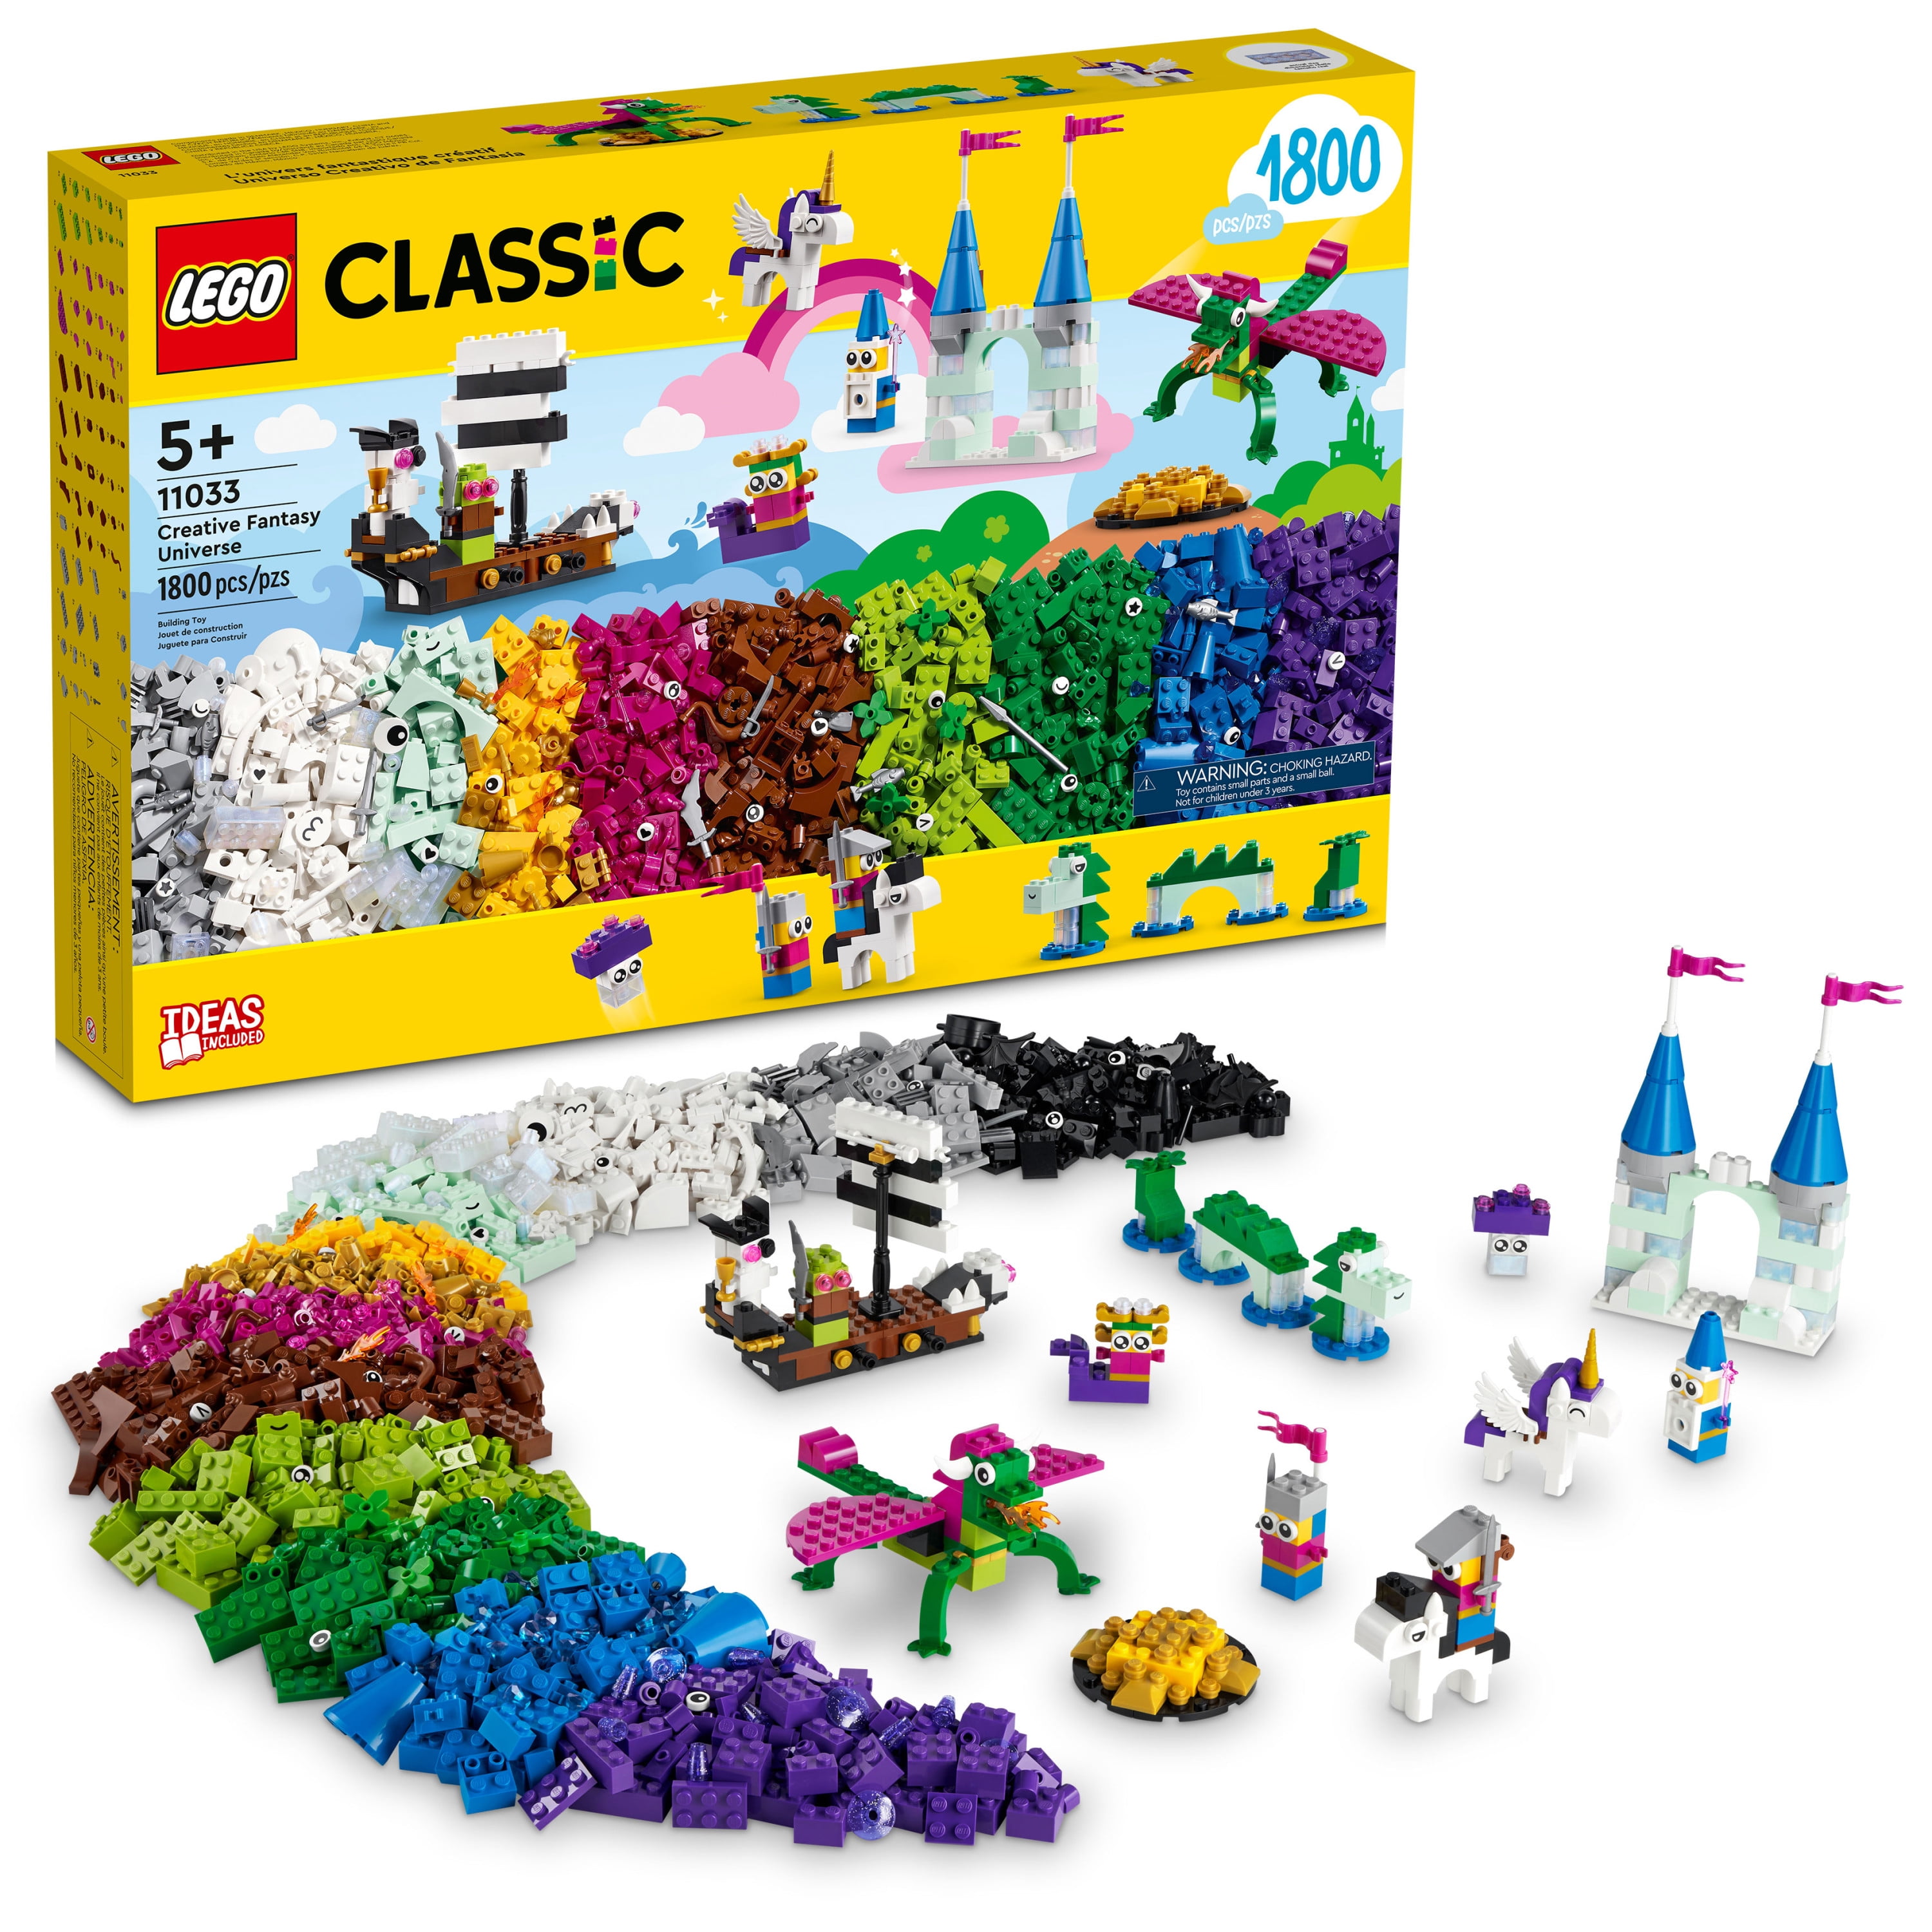 LEGO Classic Creative Fantasy Universe Set 11033, Building Adventure with Unicorn Toy, Castle, Dragon and Pirate Ship Builds, Toys for Kids ages 5 Plus